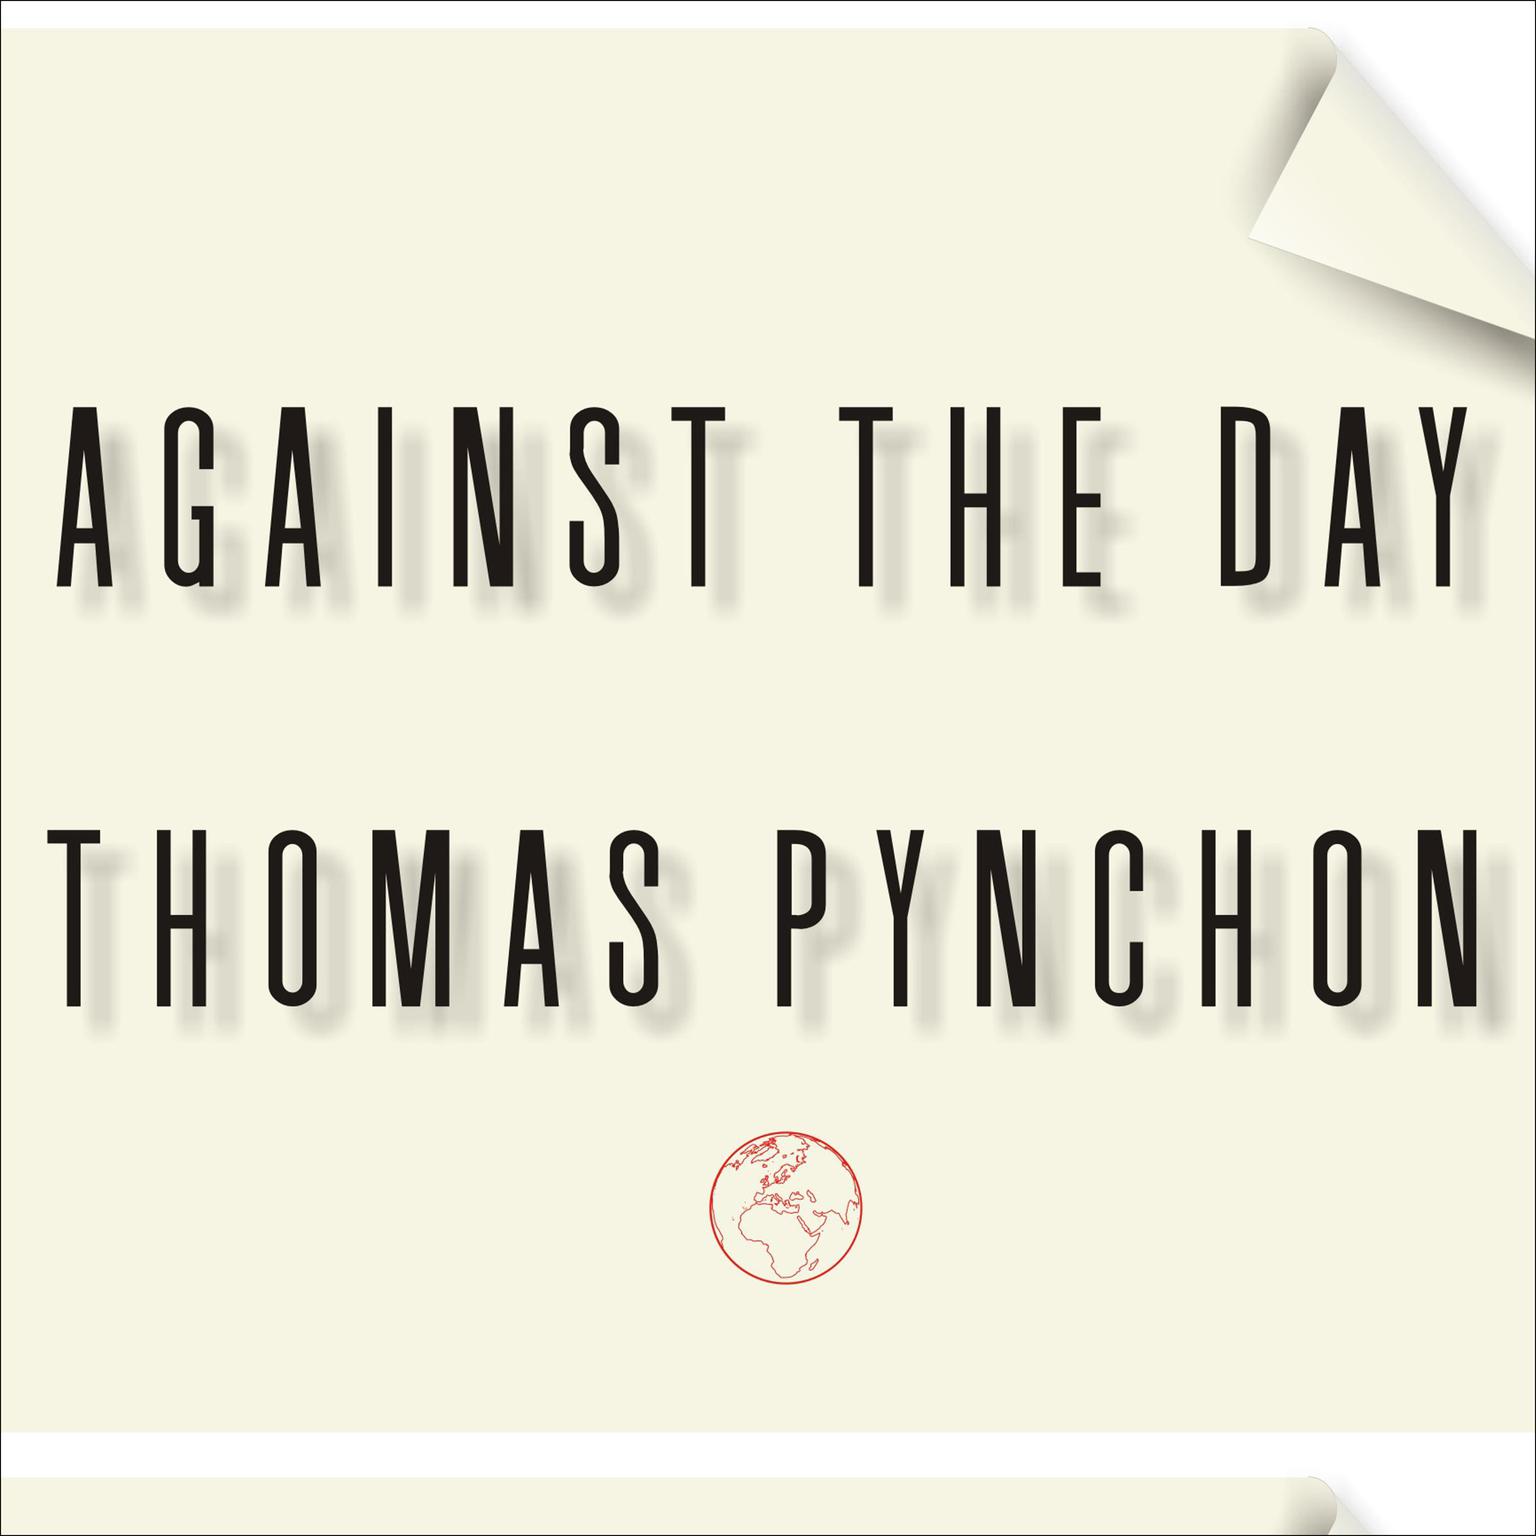 Against the Day Audiobook, by Thomas Pynchon